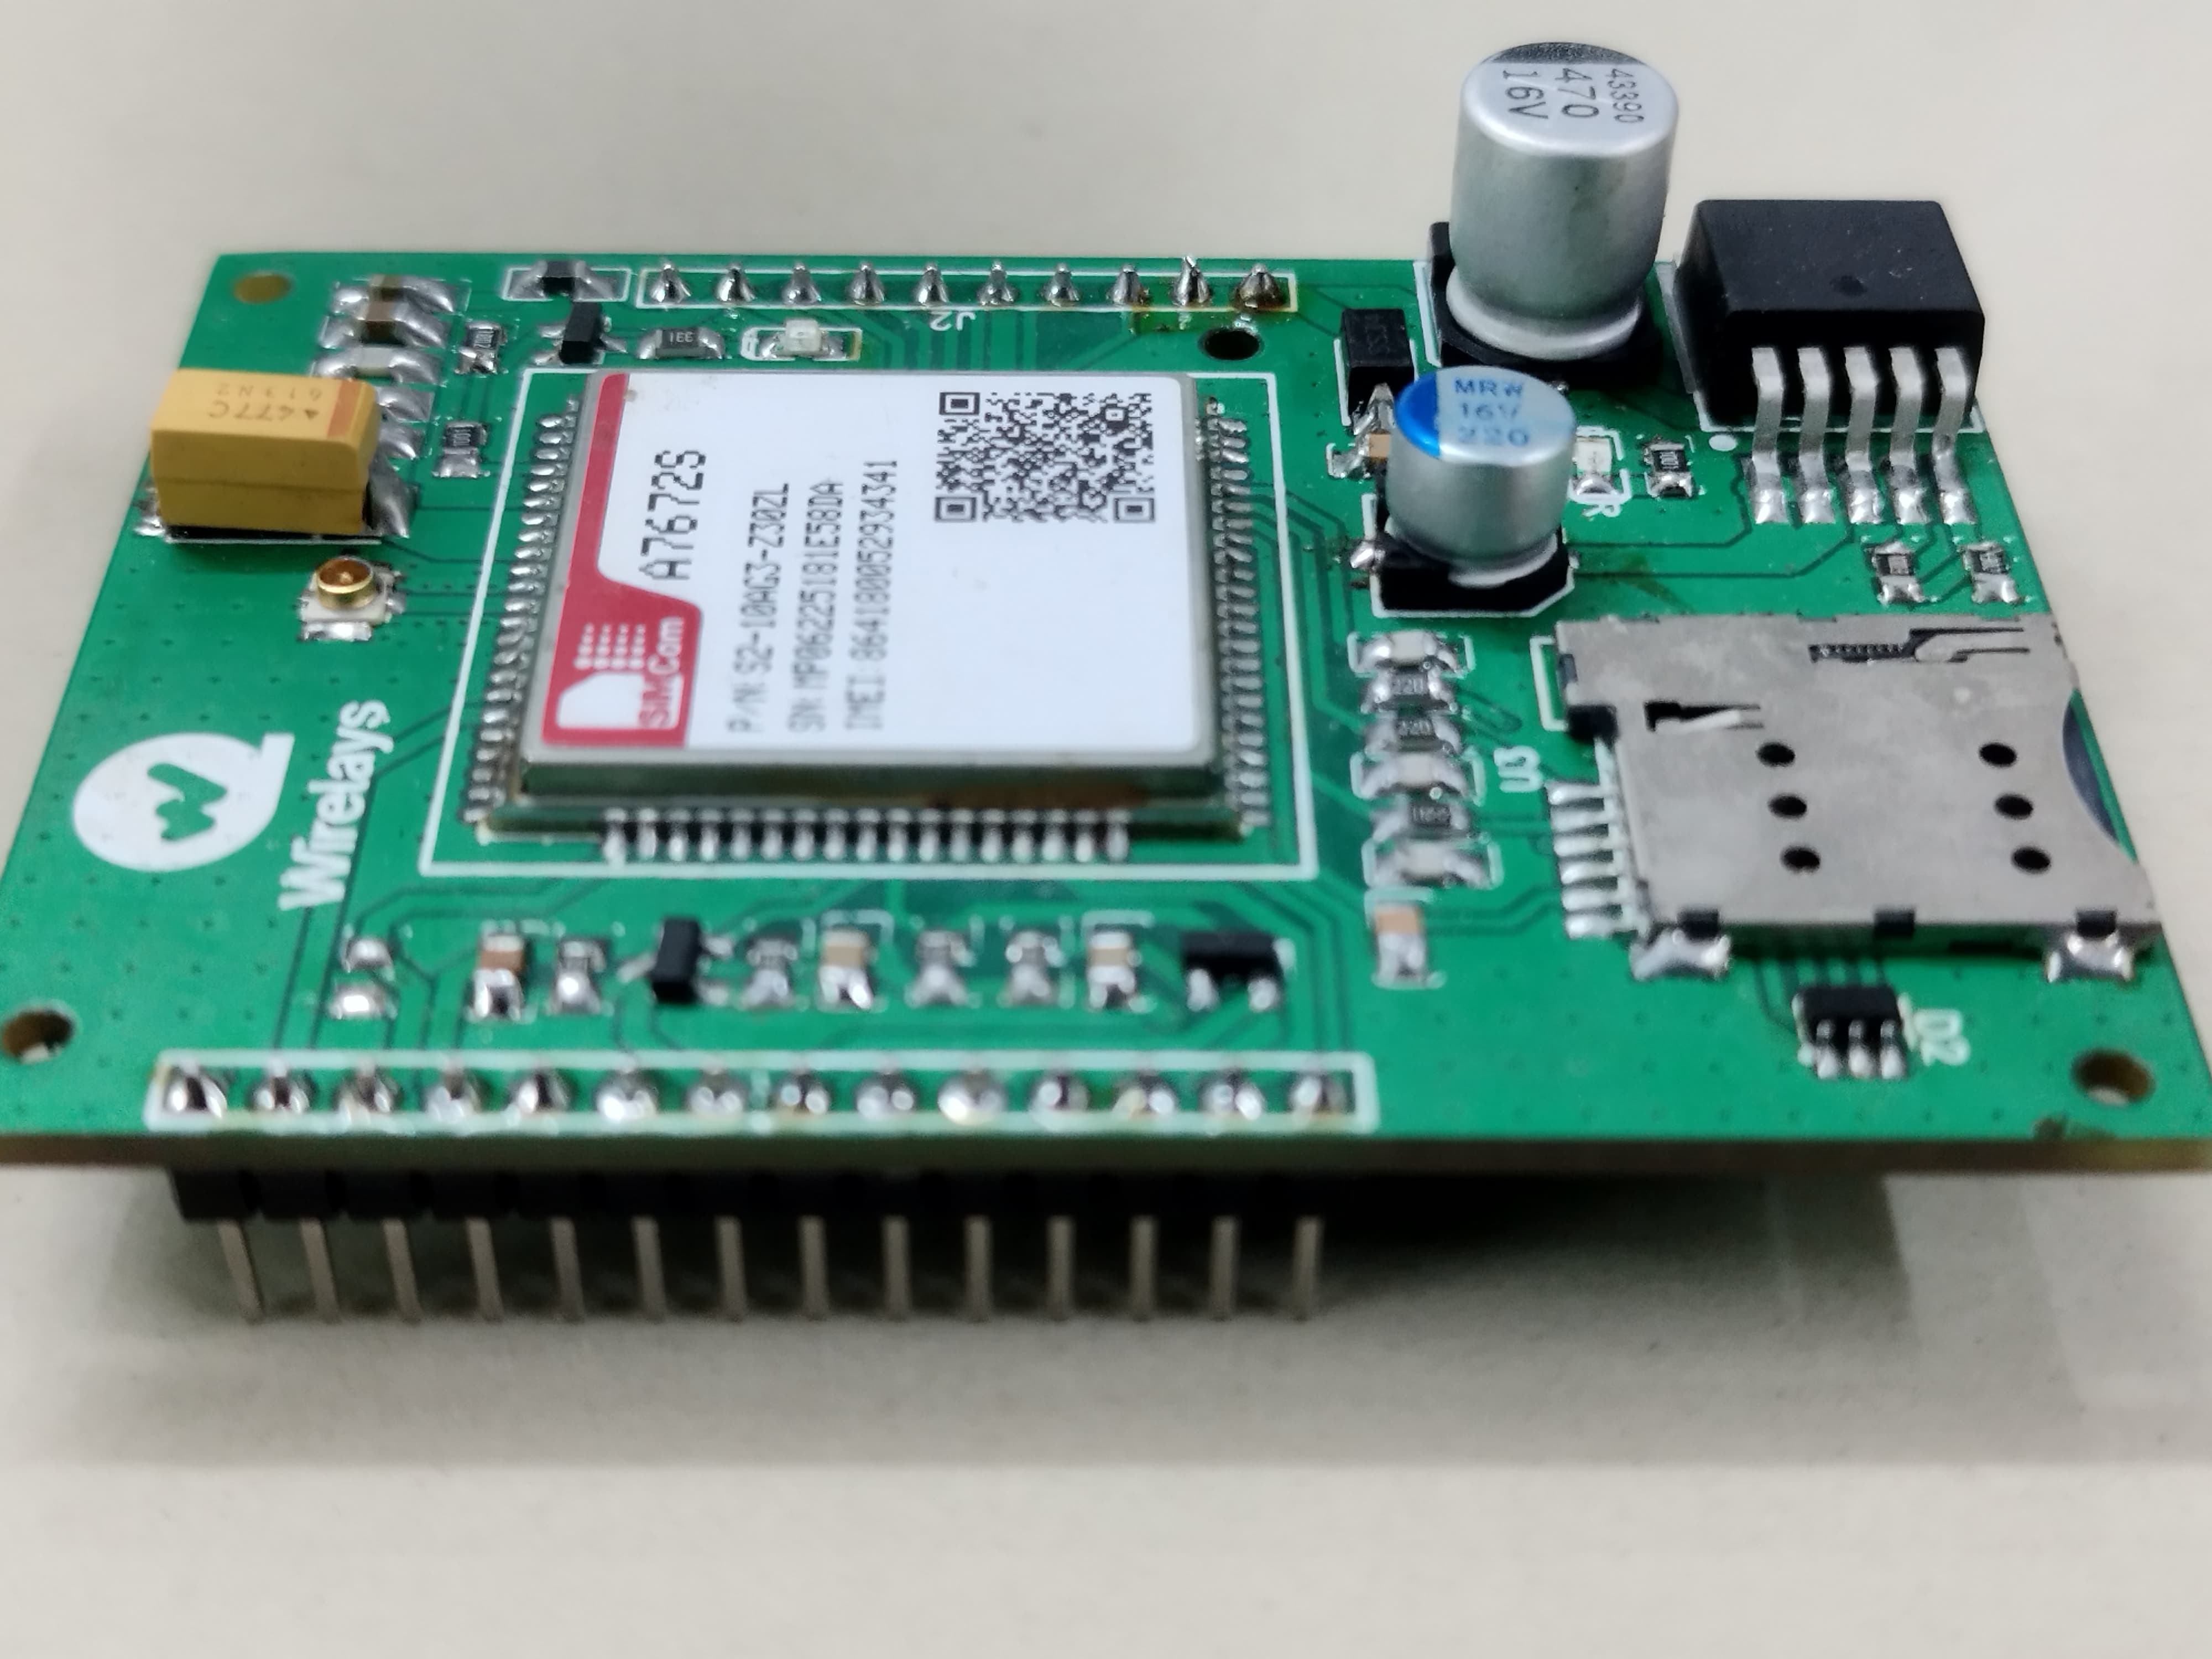 SIM A7672S 4G + 2G LTE Development Board – Without GNSS | 4G development Board | SIM A7672S Development Board | 4G Module